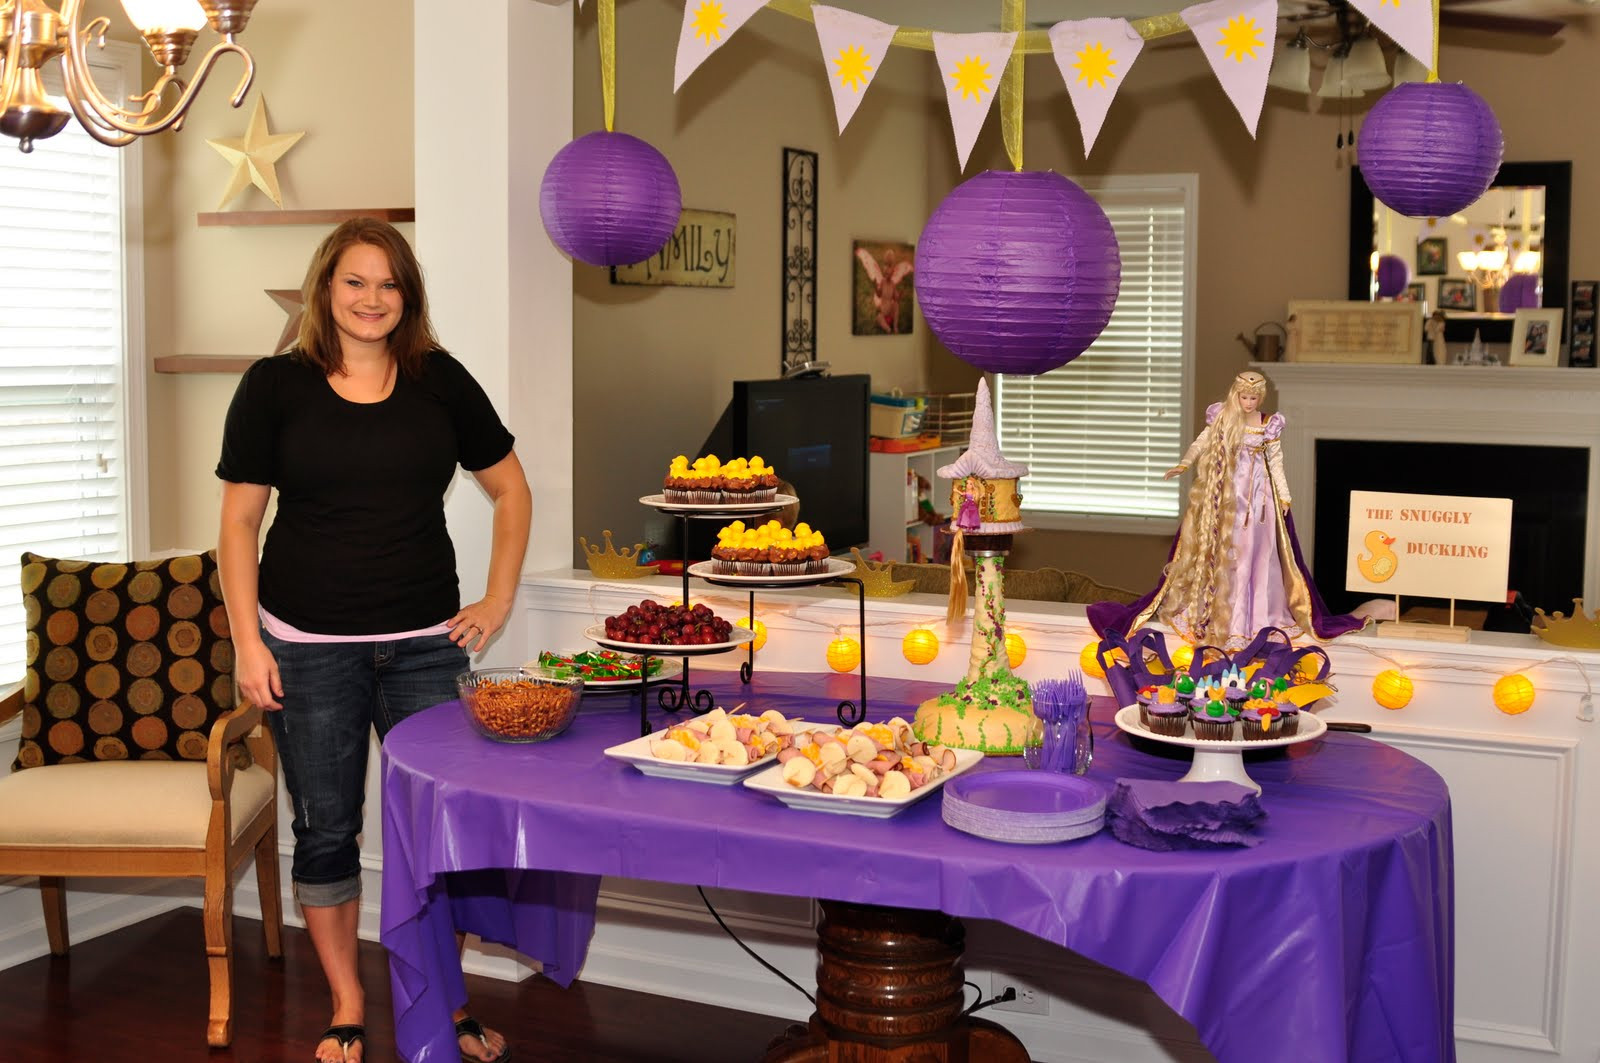 Tangled Birthday Party Supplies
 GROSS FAMILY Rileys Second Birthday Party Tangled Theme